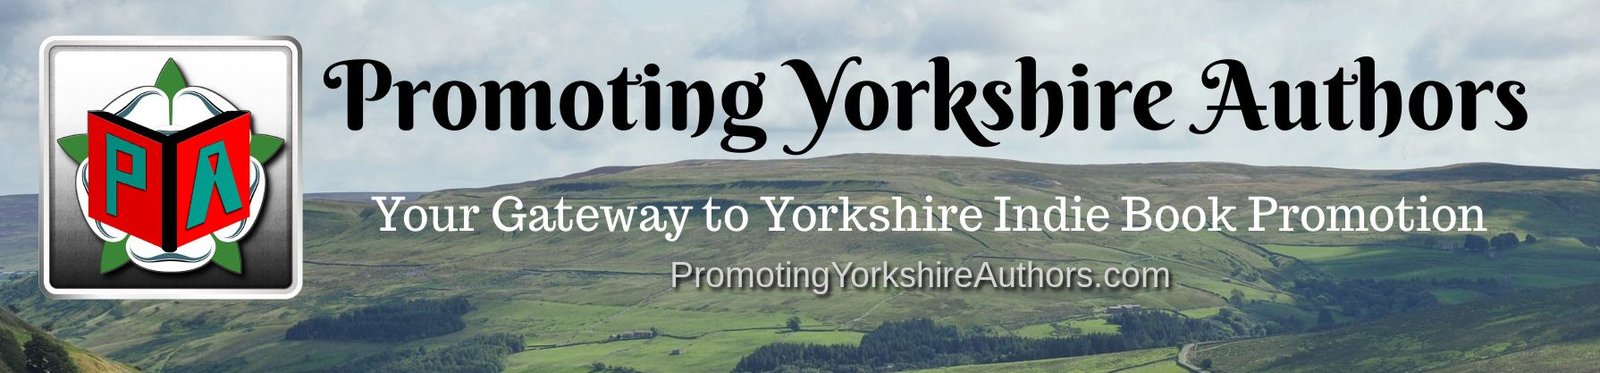 Promoting Yorkshire Authors